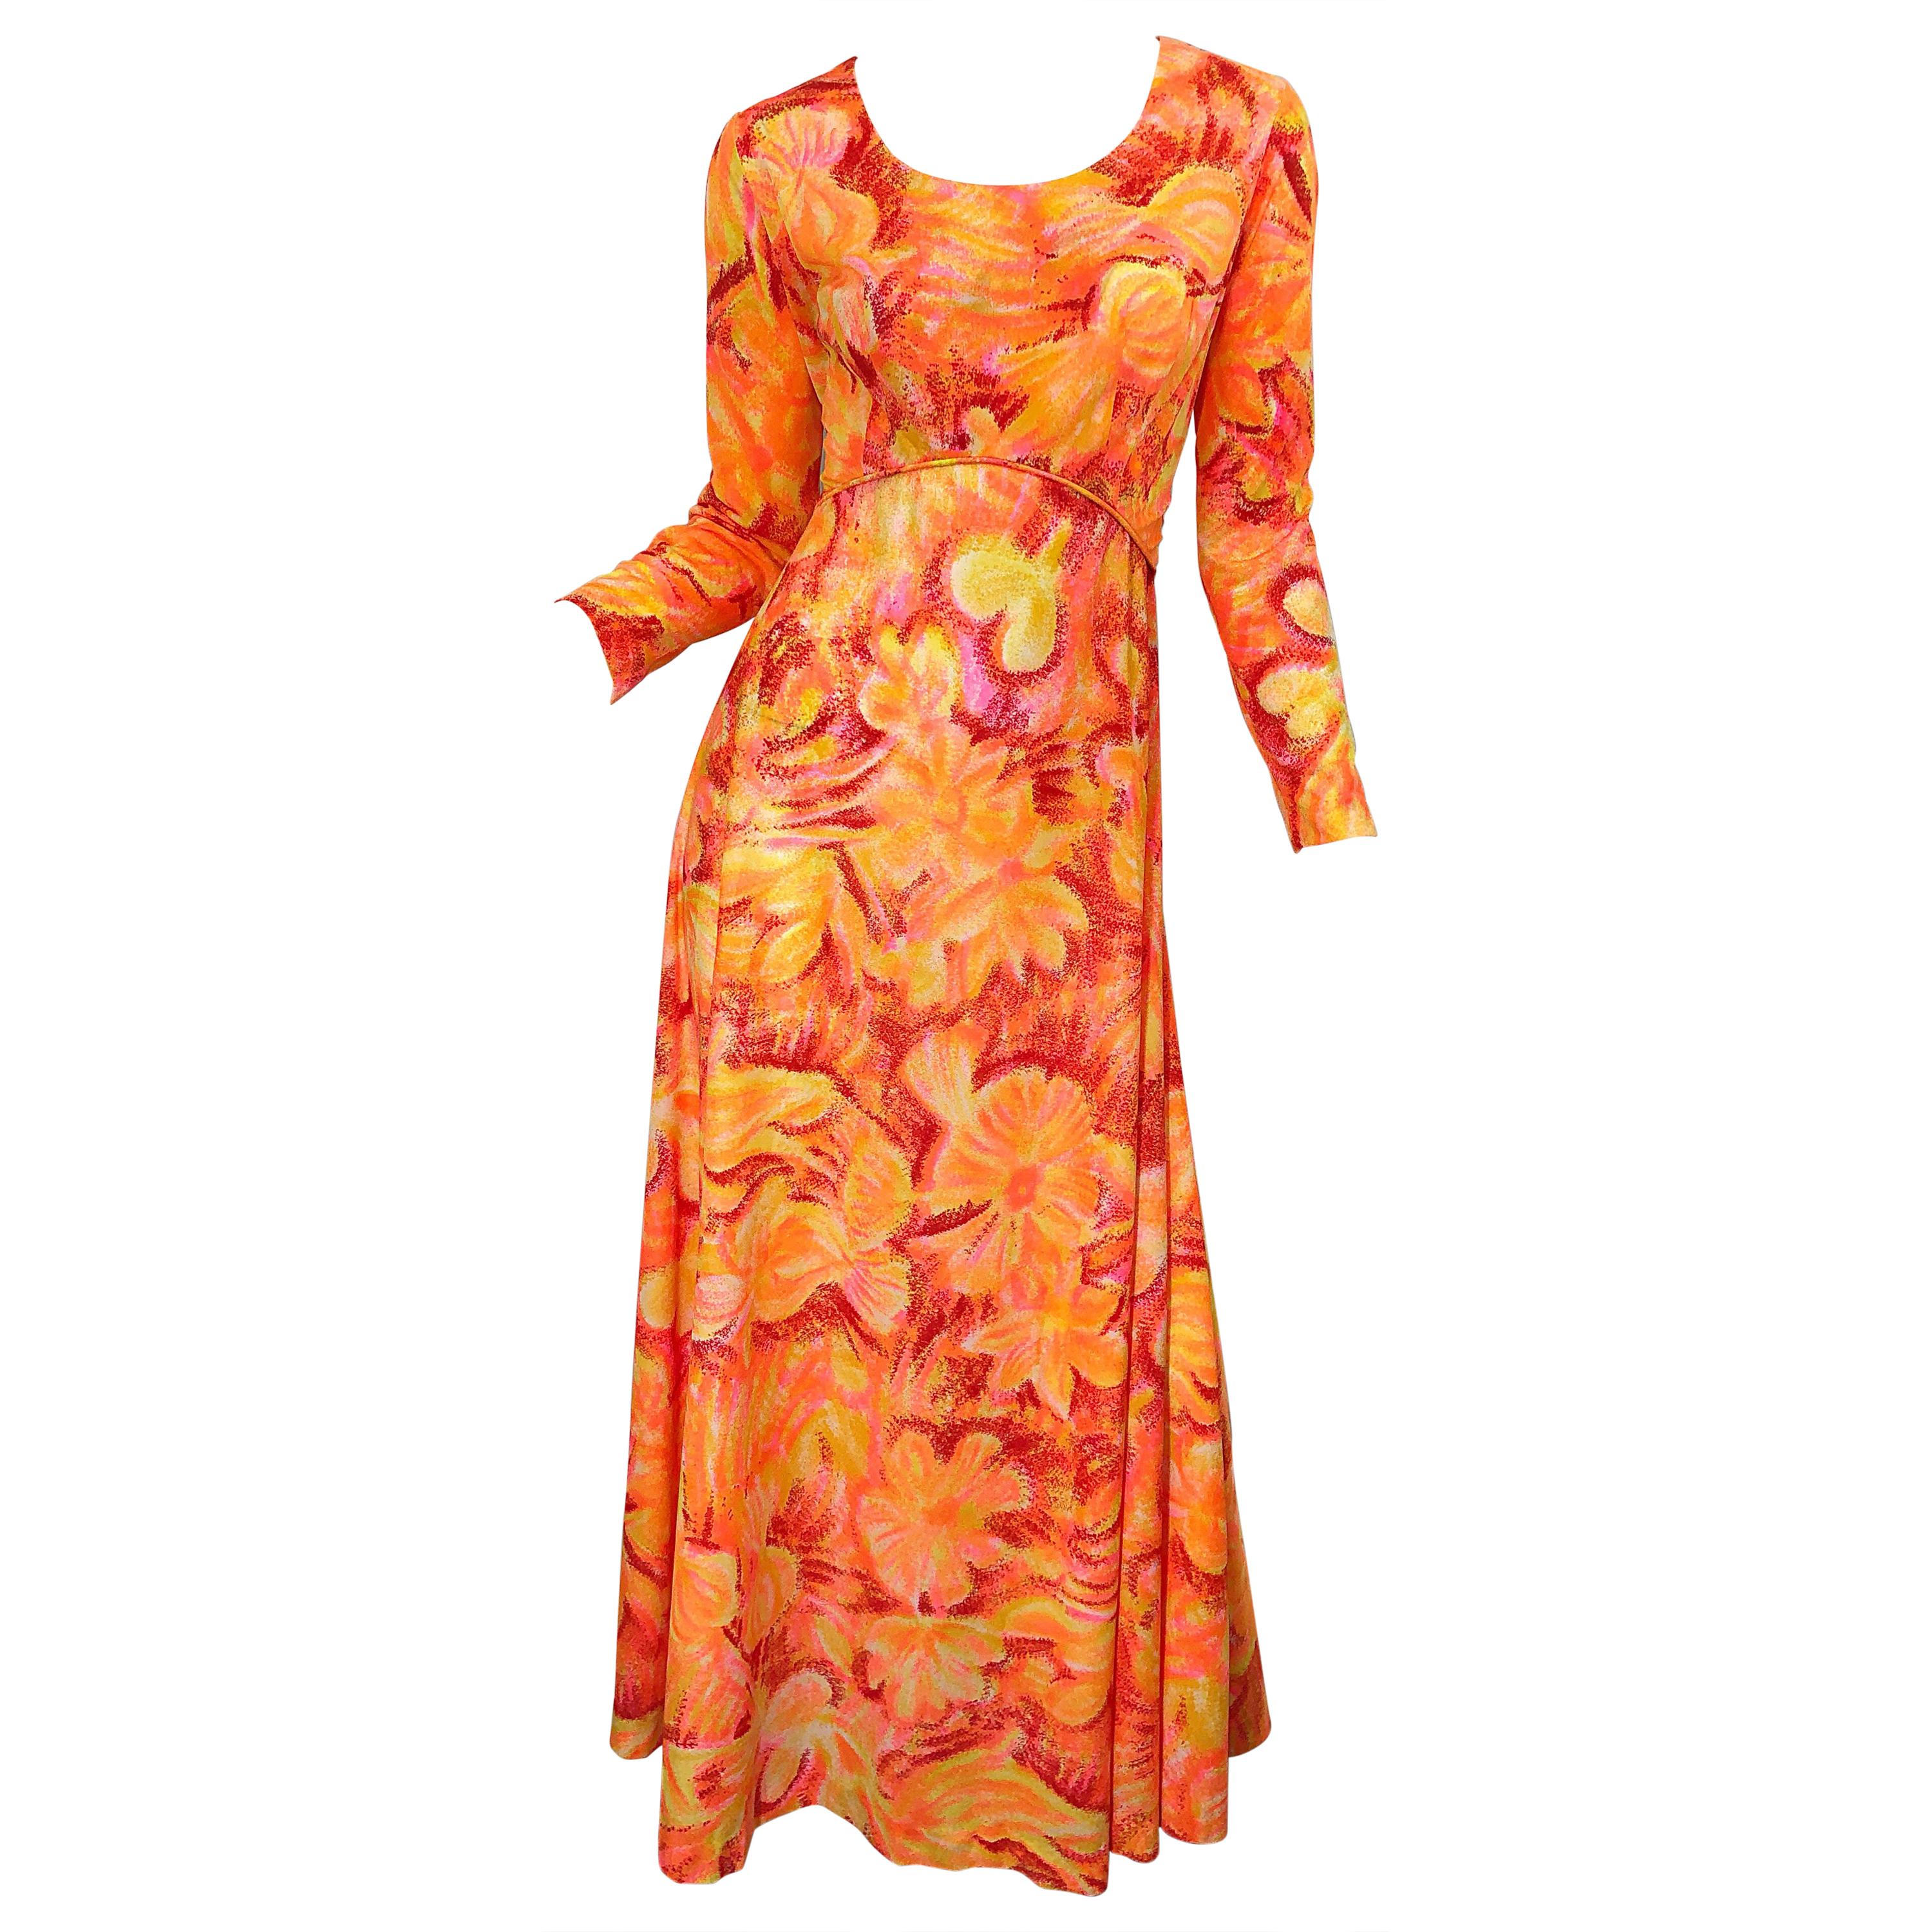 1970s Bright Neon Orange + Hot Pink Abstract Flower Print Long Sleeve Maxi Dress